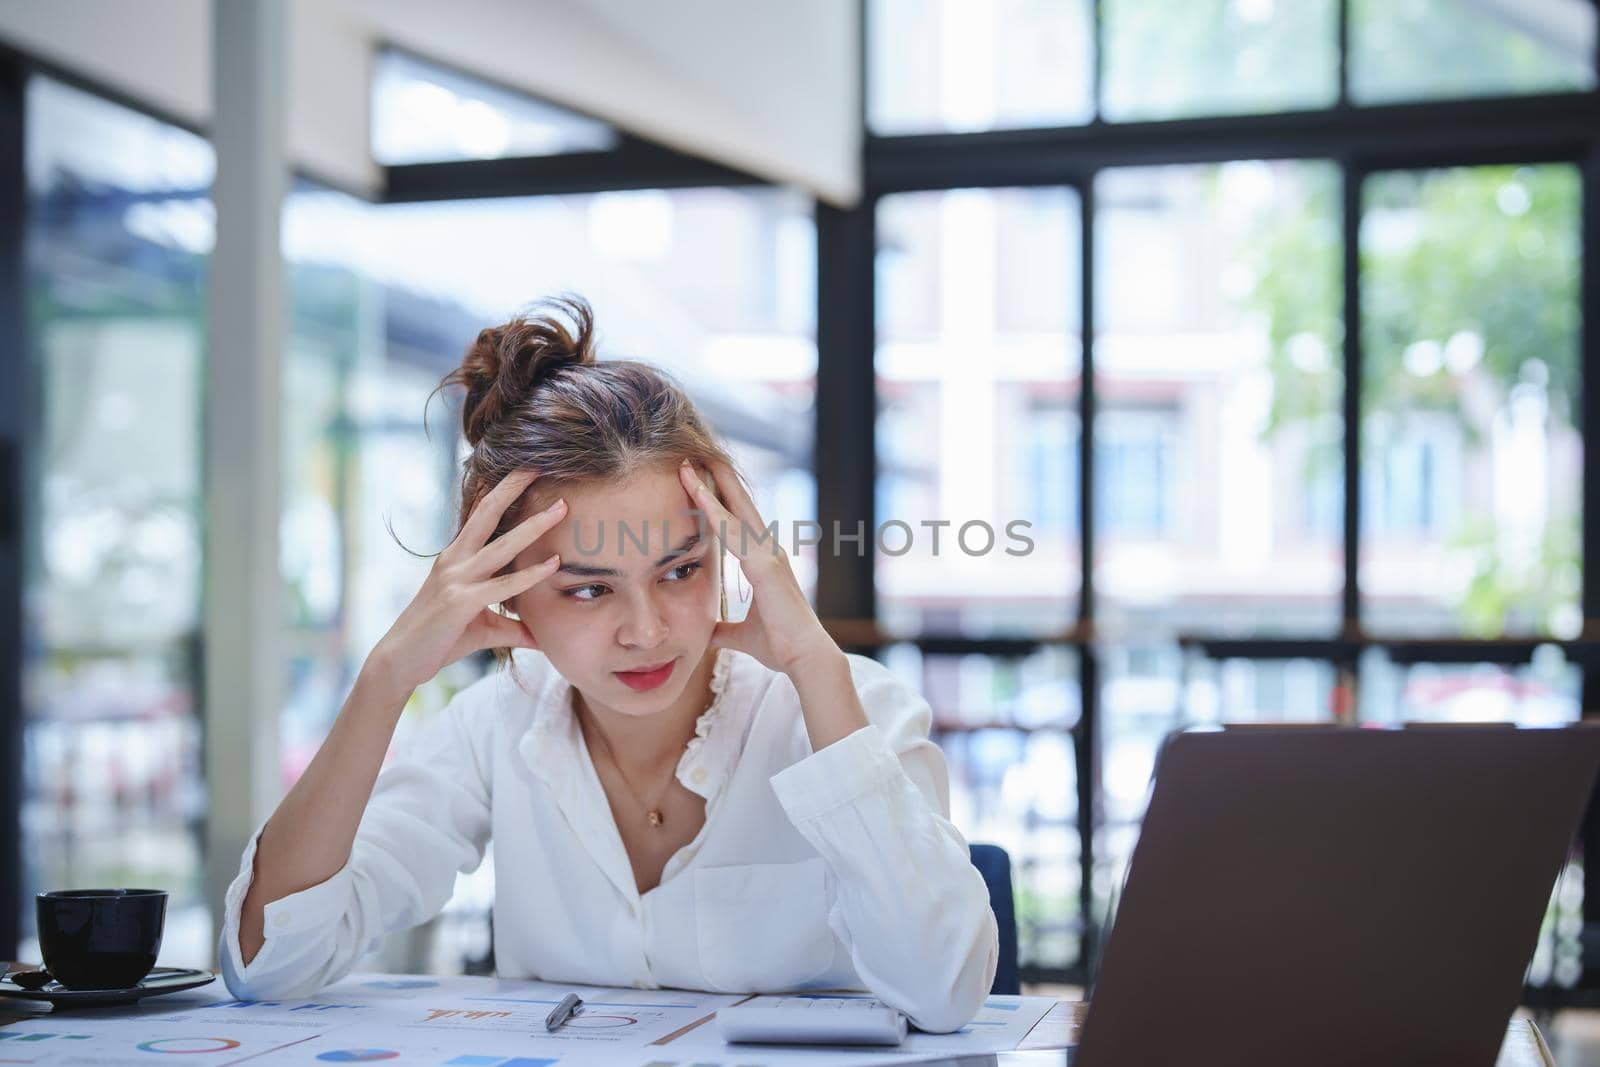 A portrait of a young employee showing an anxious and stressed face from working on paperwork on a desk.